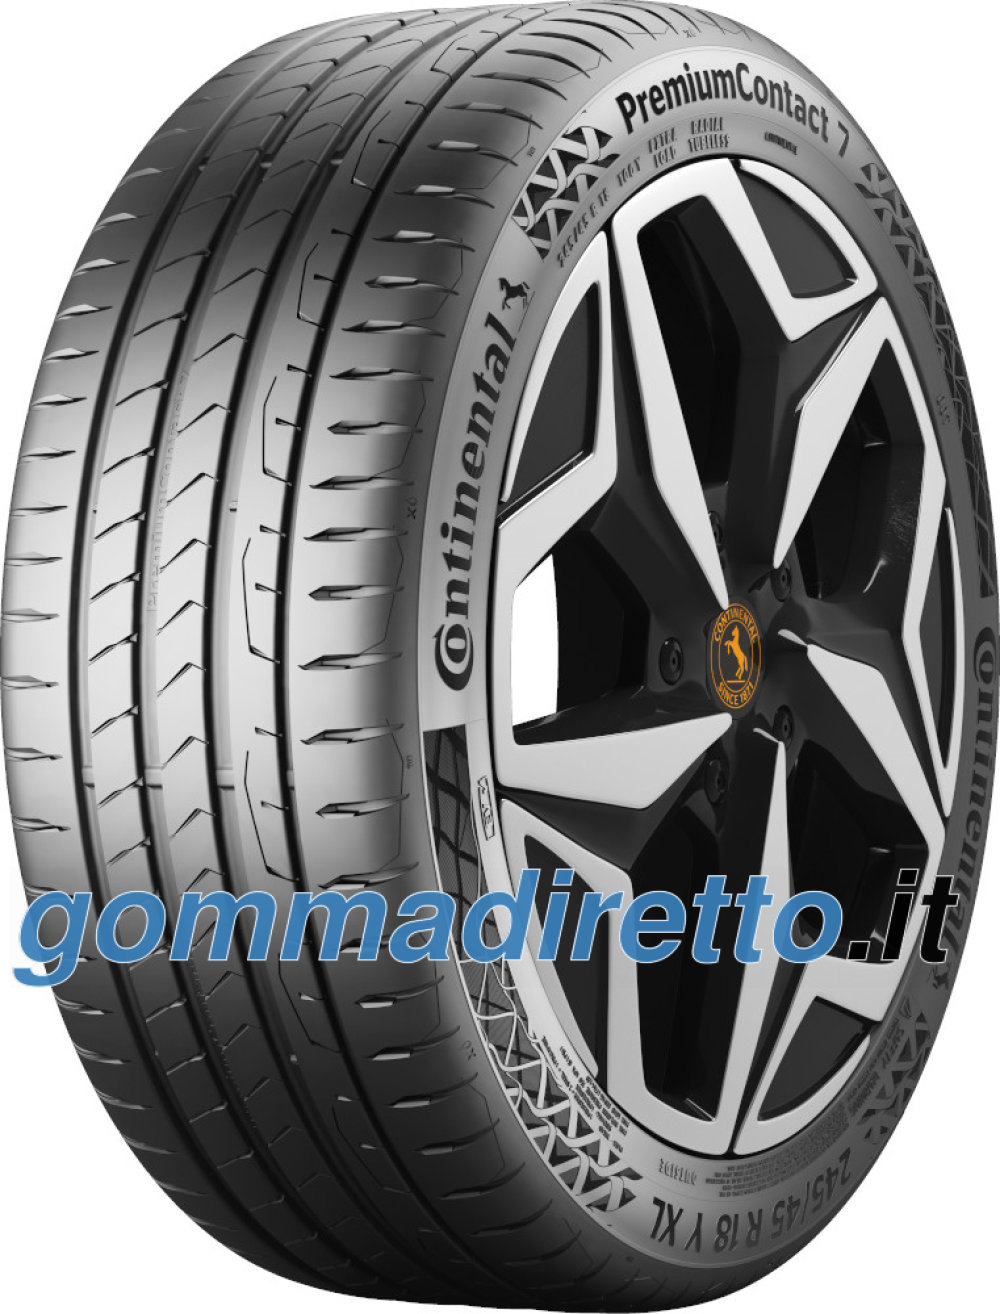 Image of Continental PremiumContact 7 ( 215/60 R16 99V XL EVc )